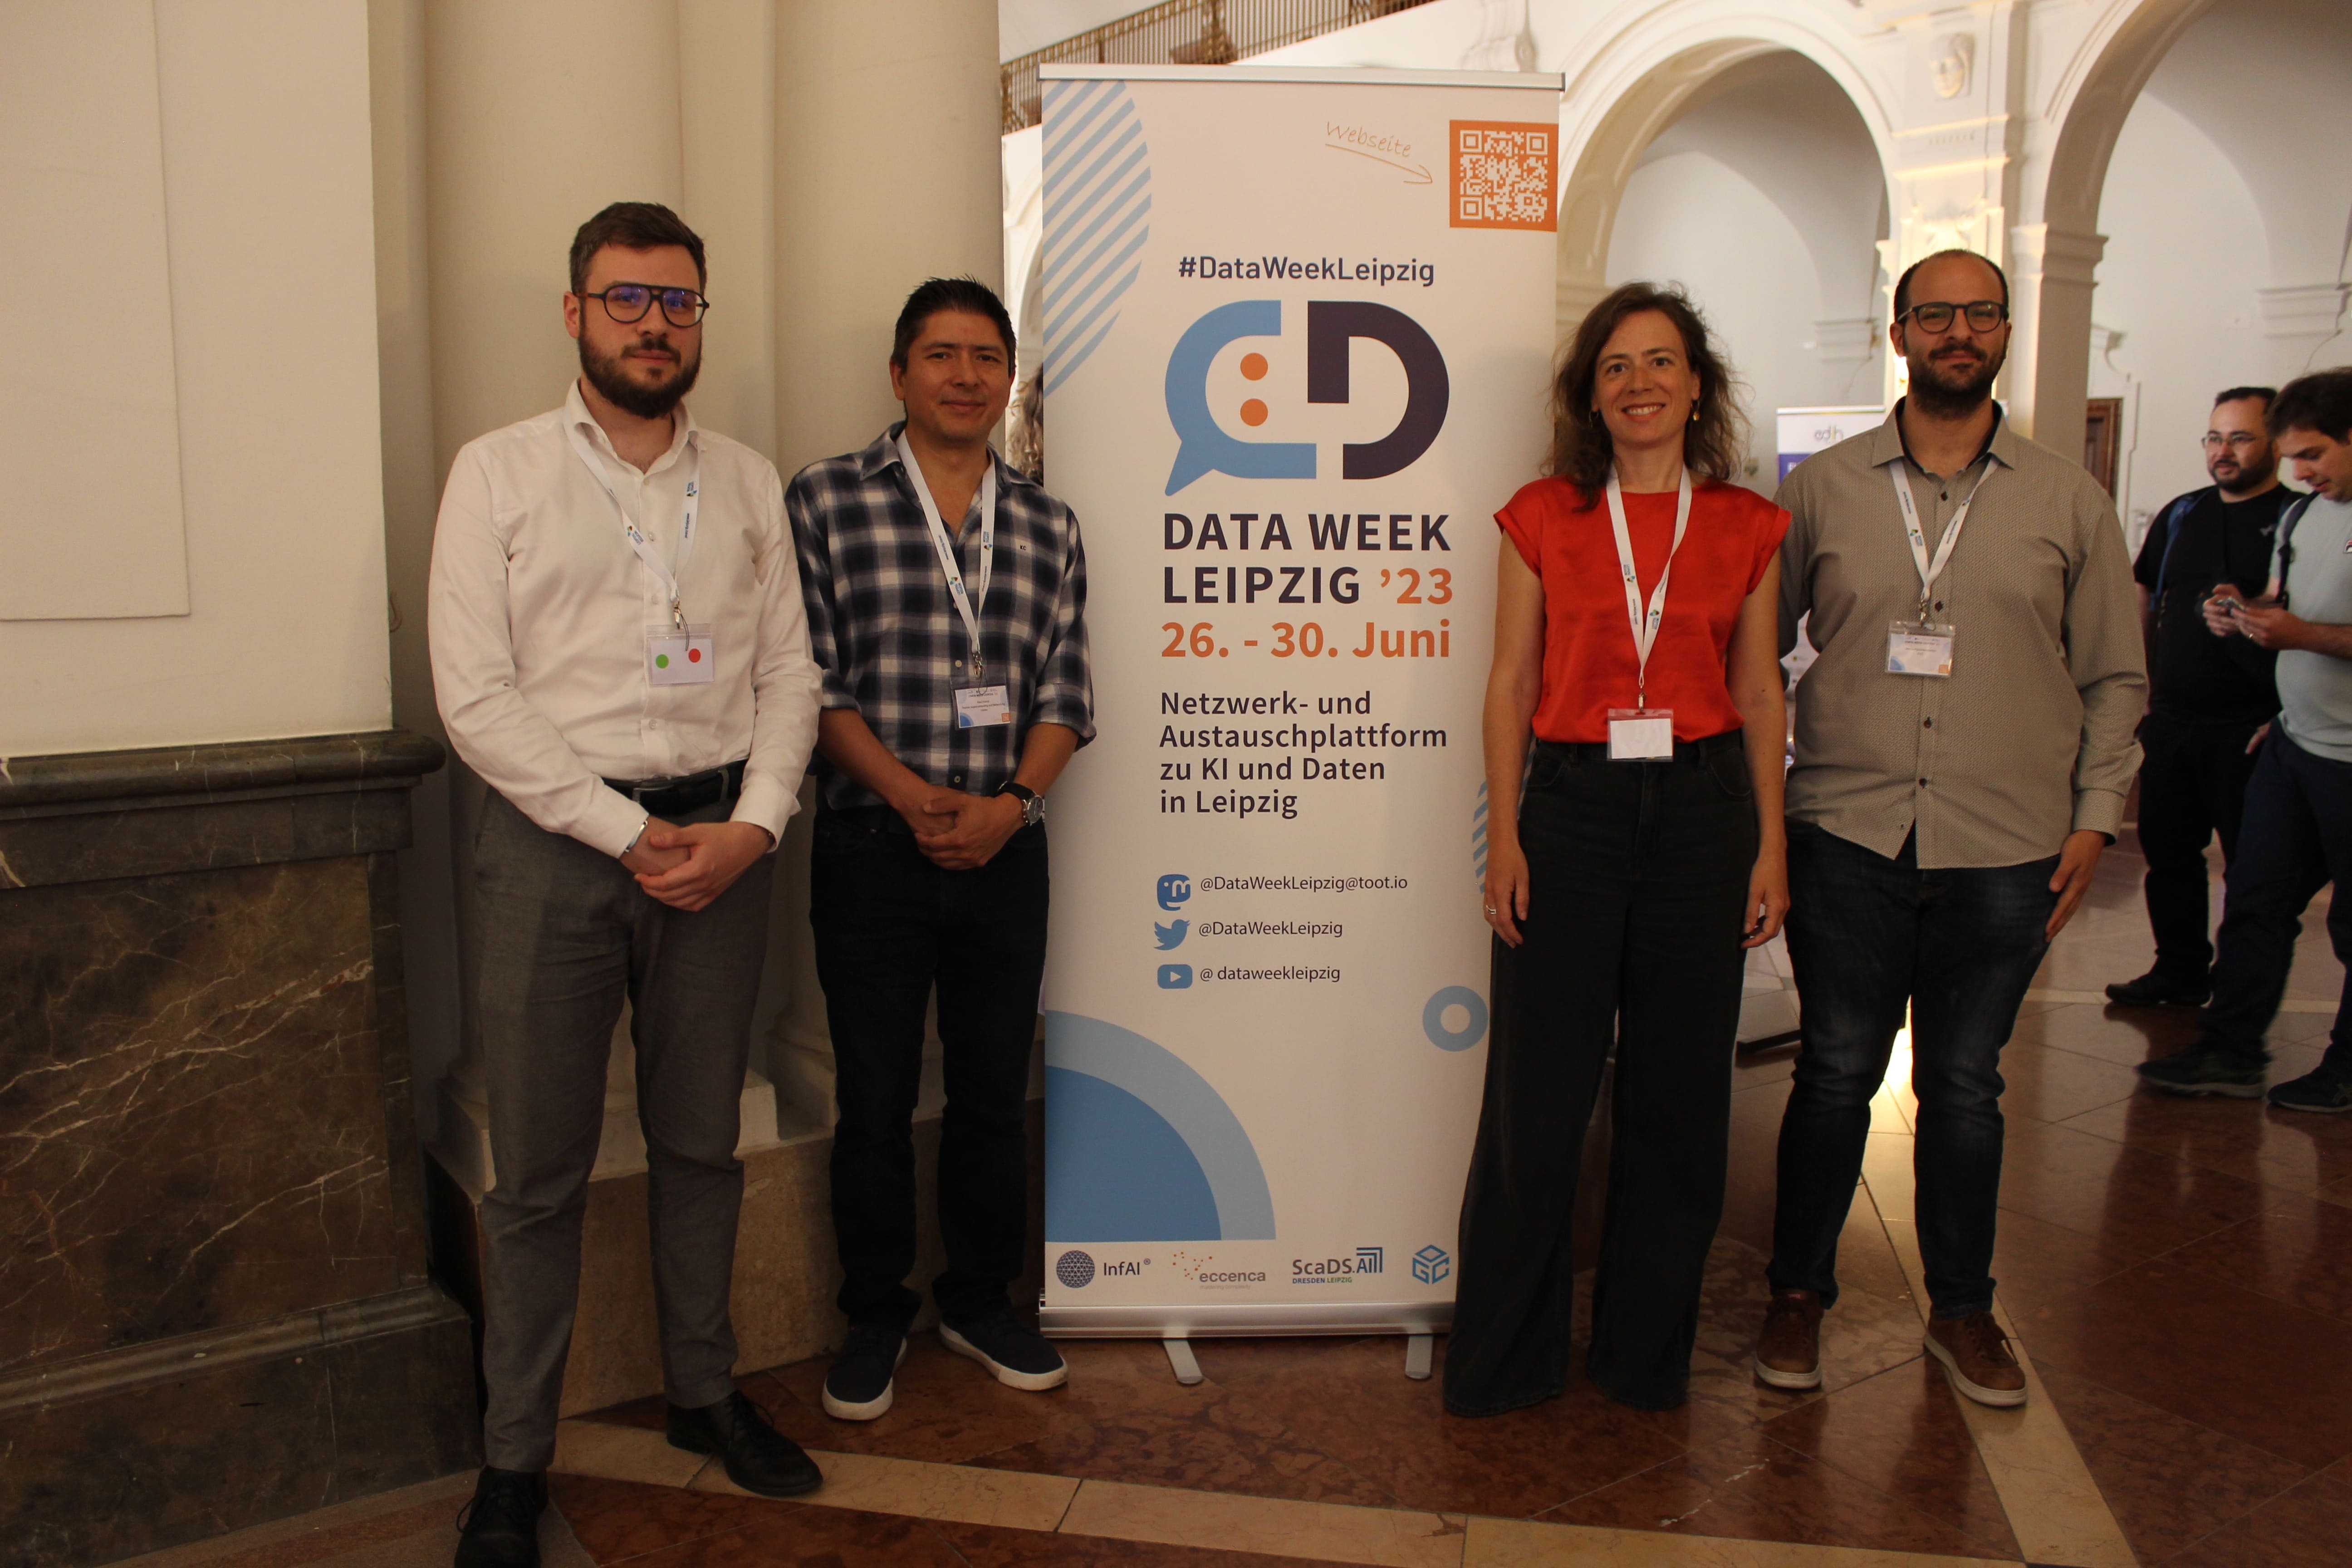 Visitors in front of the DataWeek banner